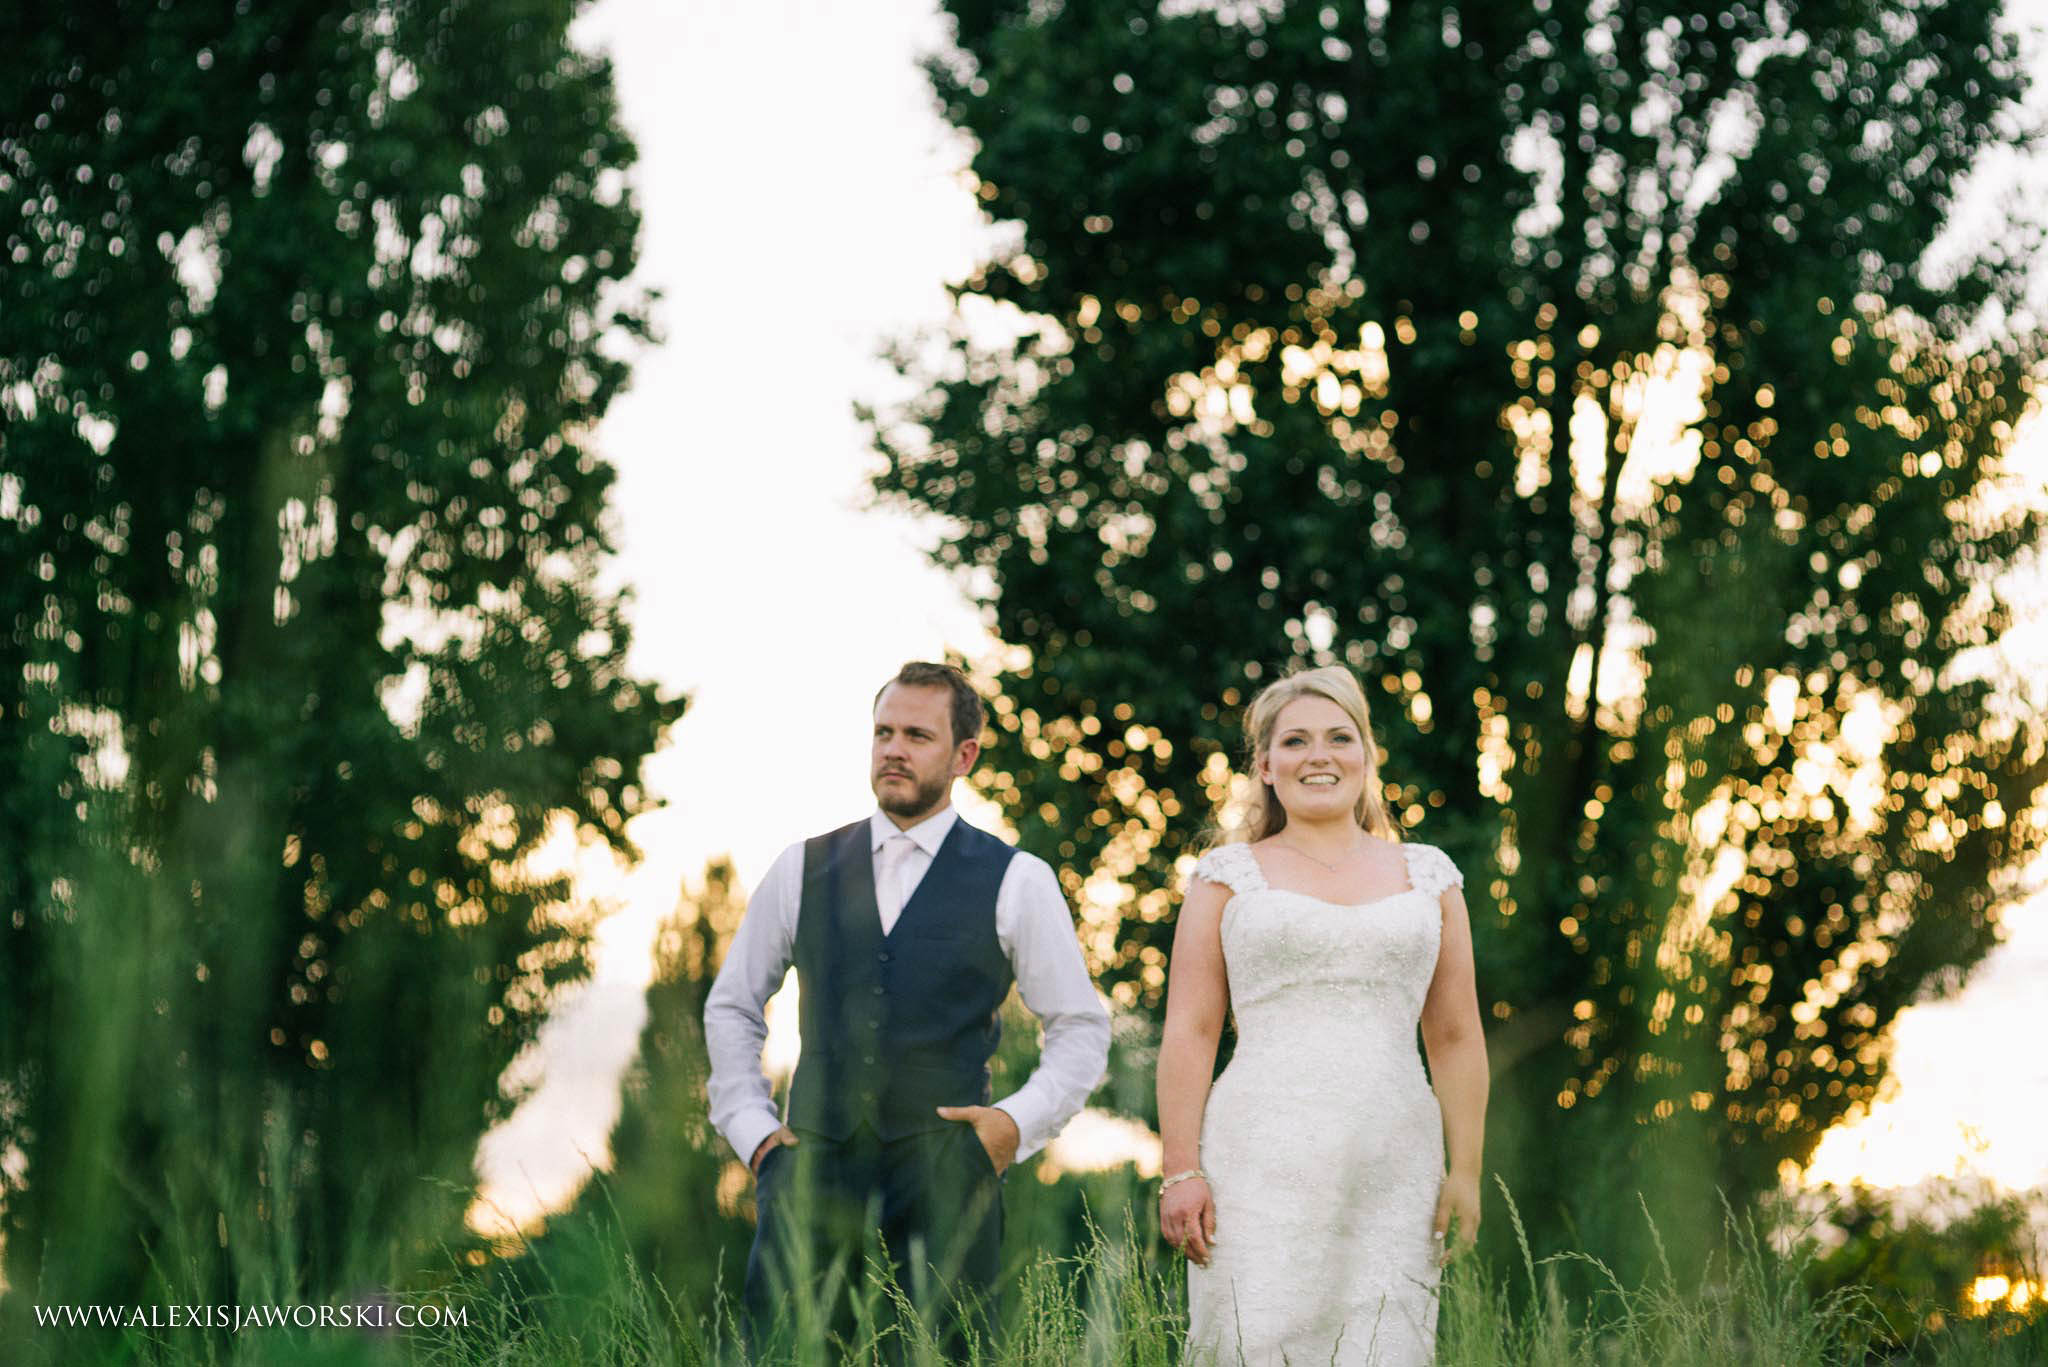 an outdoors portrait of the bride and groom